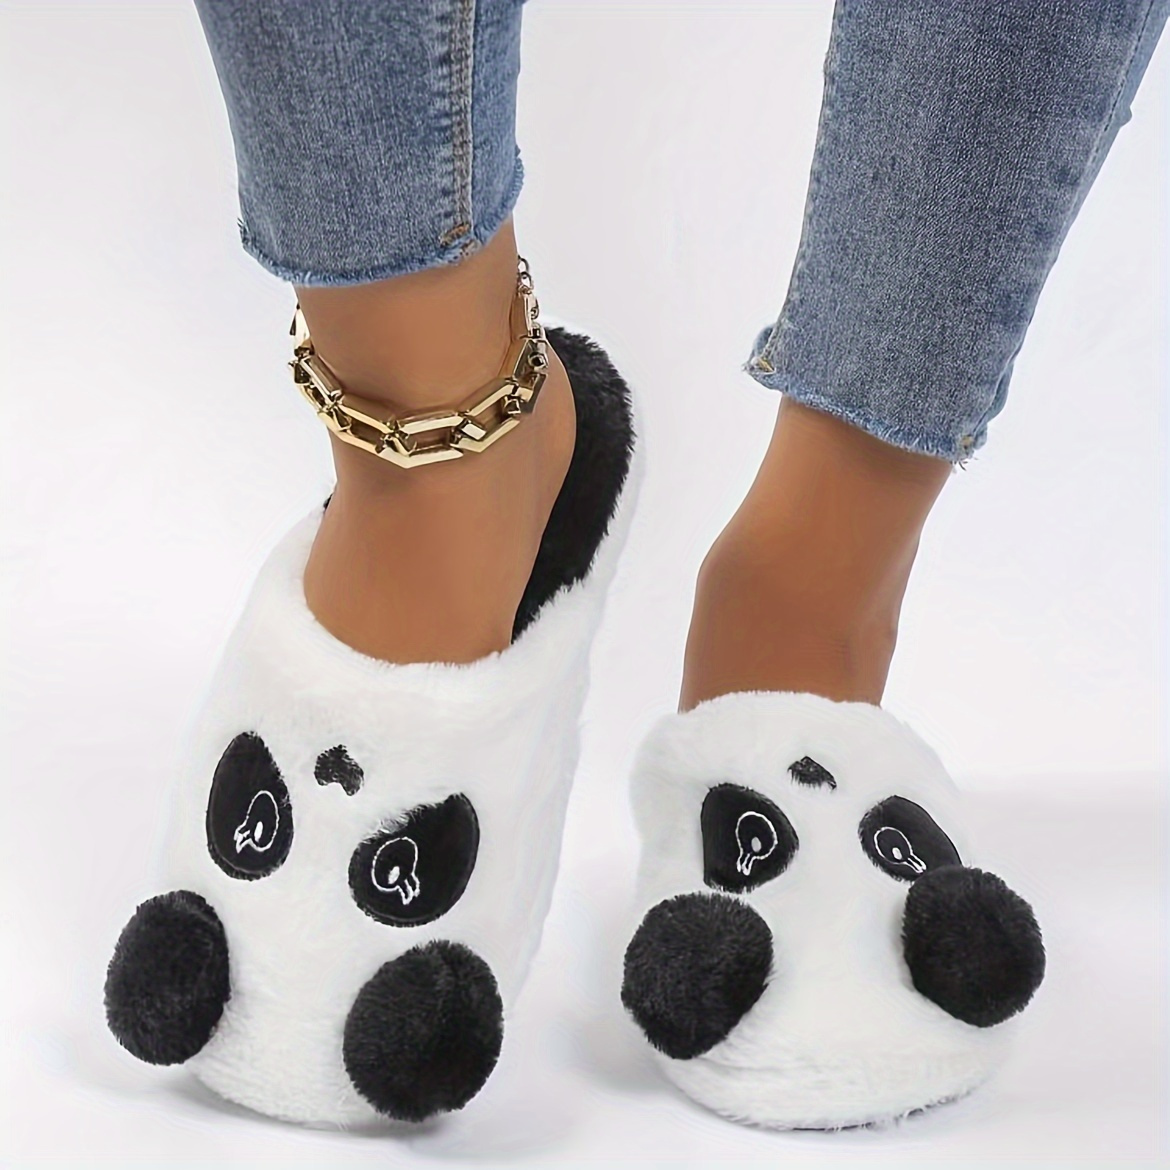 

Cute Cartoon Panda Design Slippers, Casual Slip On Plush Lined Shoes, Comfortable Indoor Home Slippers